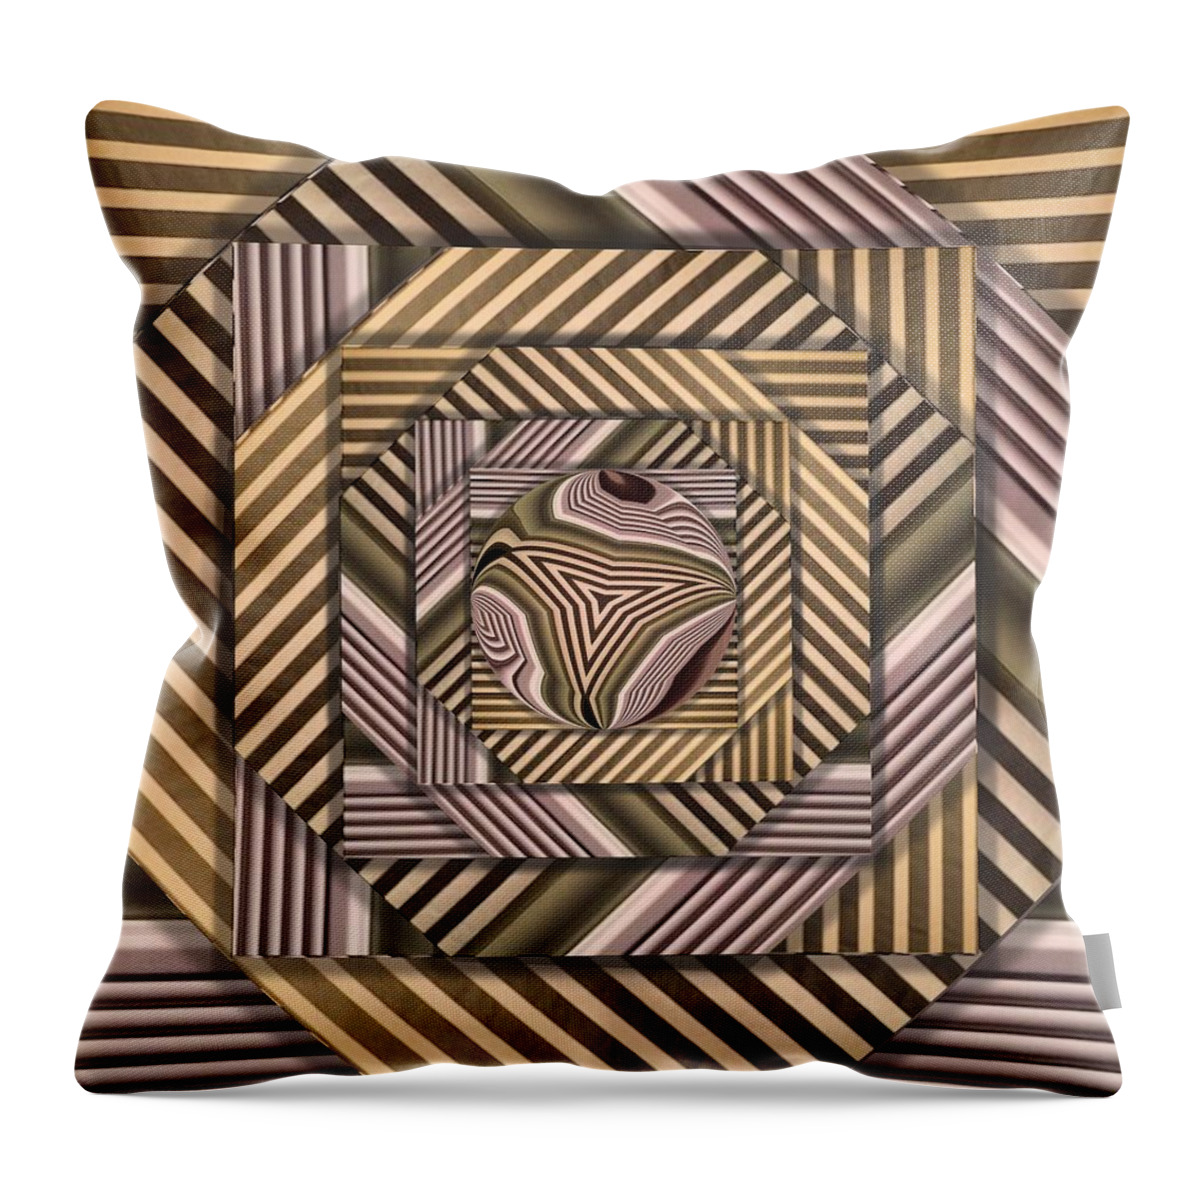 Stripes Throw Pillow featuring the digital art Line Geometry by Ronald Bissett